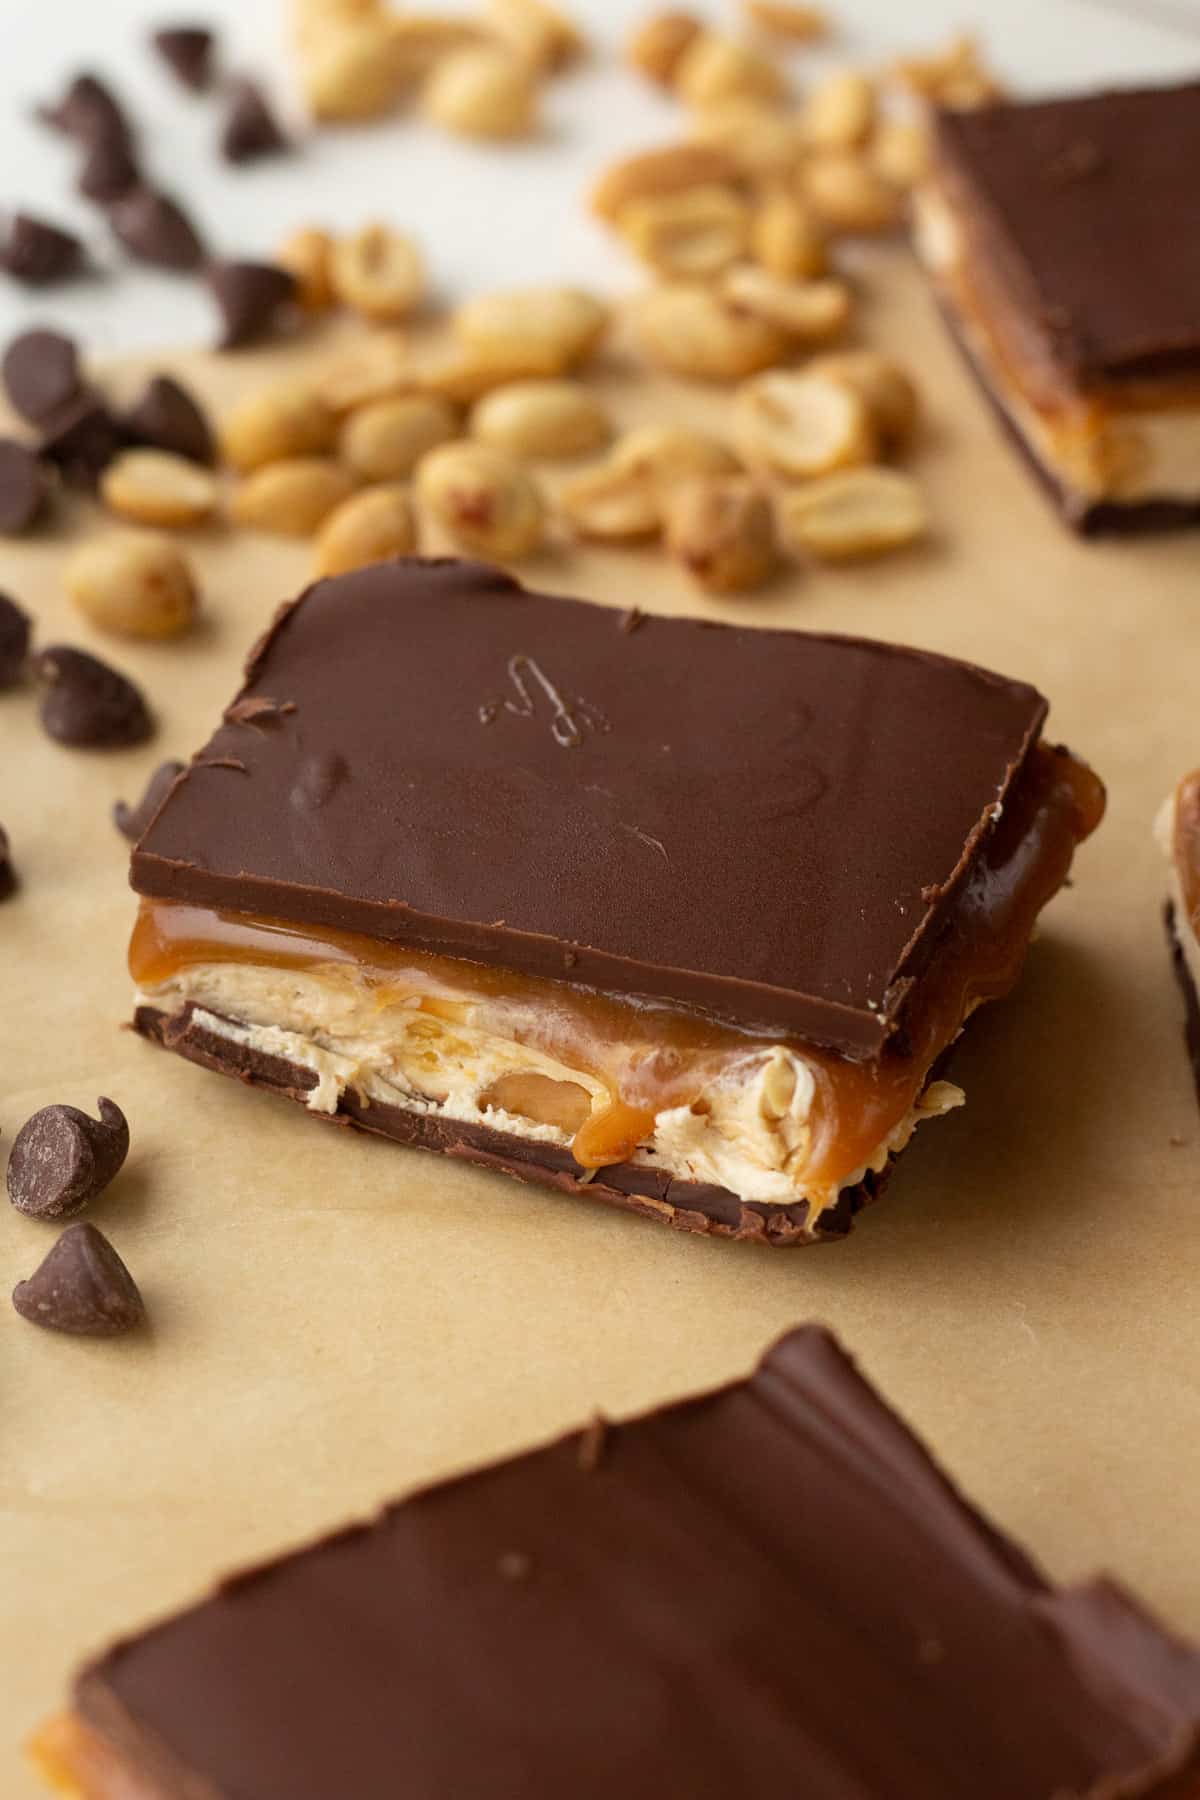 One piece of fudge on parchment, surrounded by peanuts and chocolate chips.